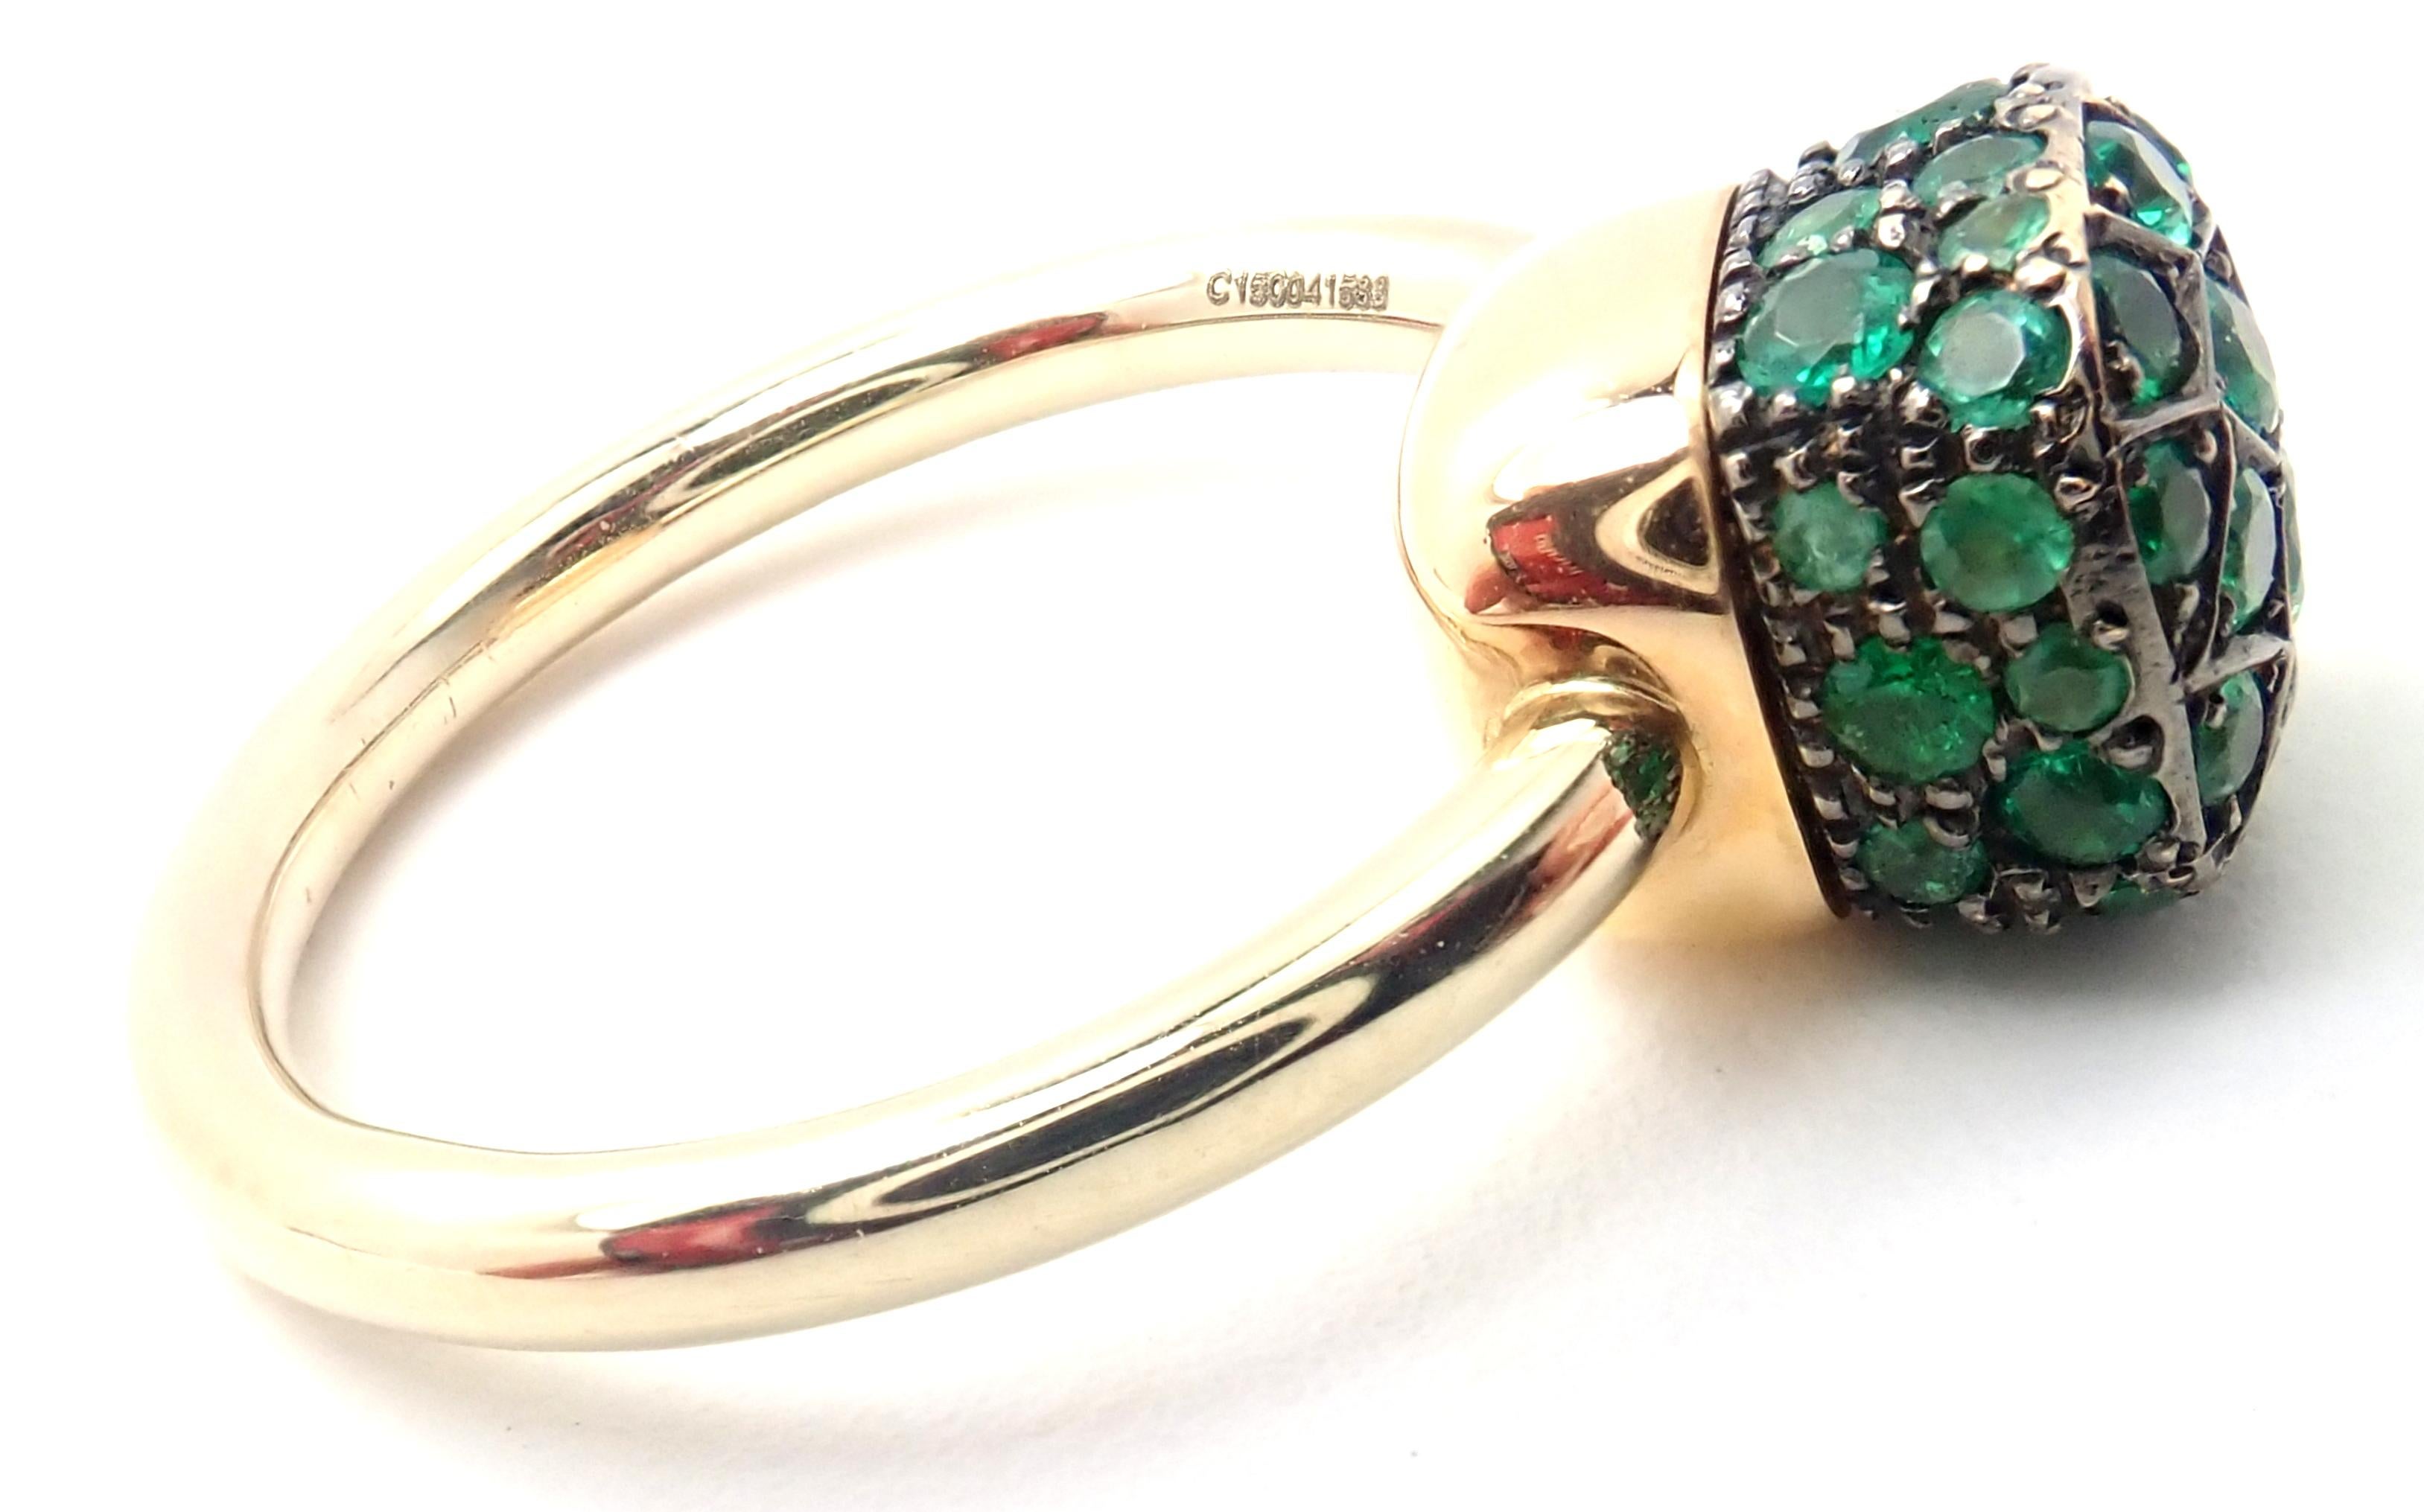 18k Yellow Gold Nudo Emerald Ring by Pomellato. 
With Round emerald stones total weight approximately .74ct
Details:
Size: 6 1/2
Width: 9mm
Weight: 7.2 grams
Stamped Hallmarks: Pomellato 750 C150041583
*Free Shipping within the United States*
YOUR